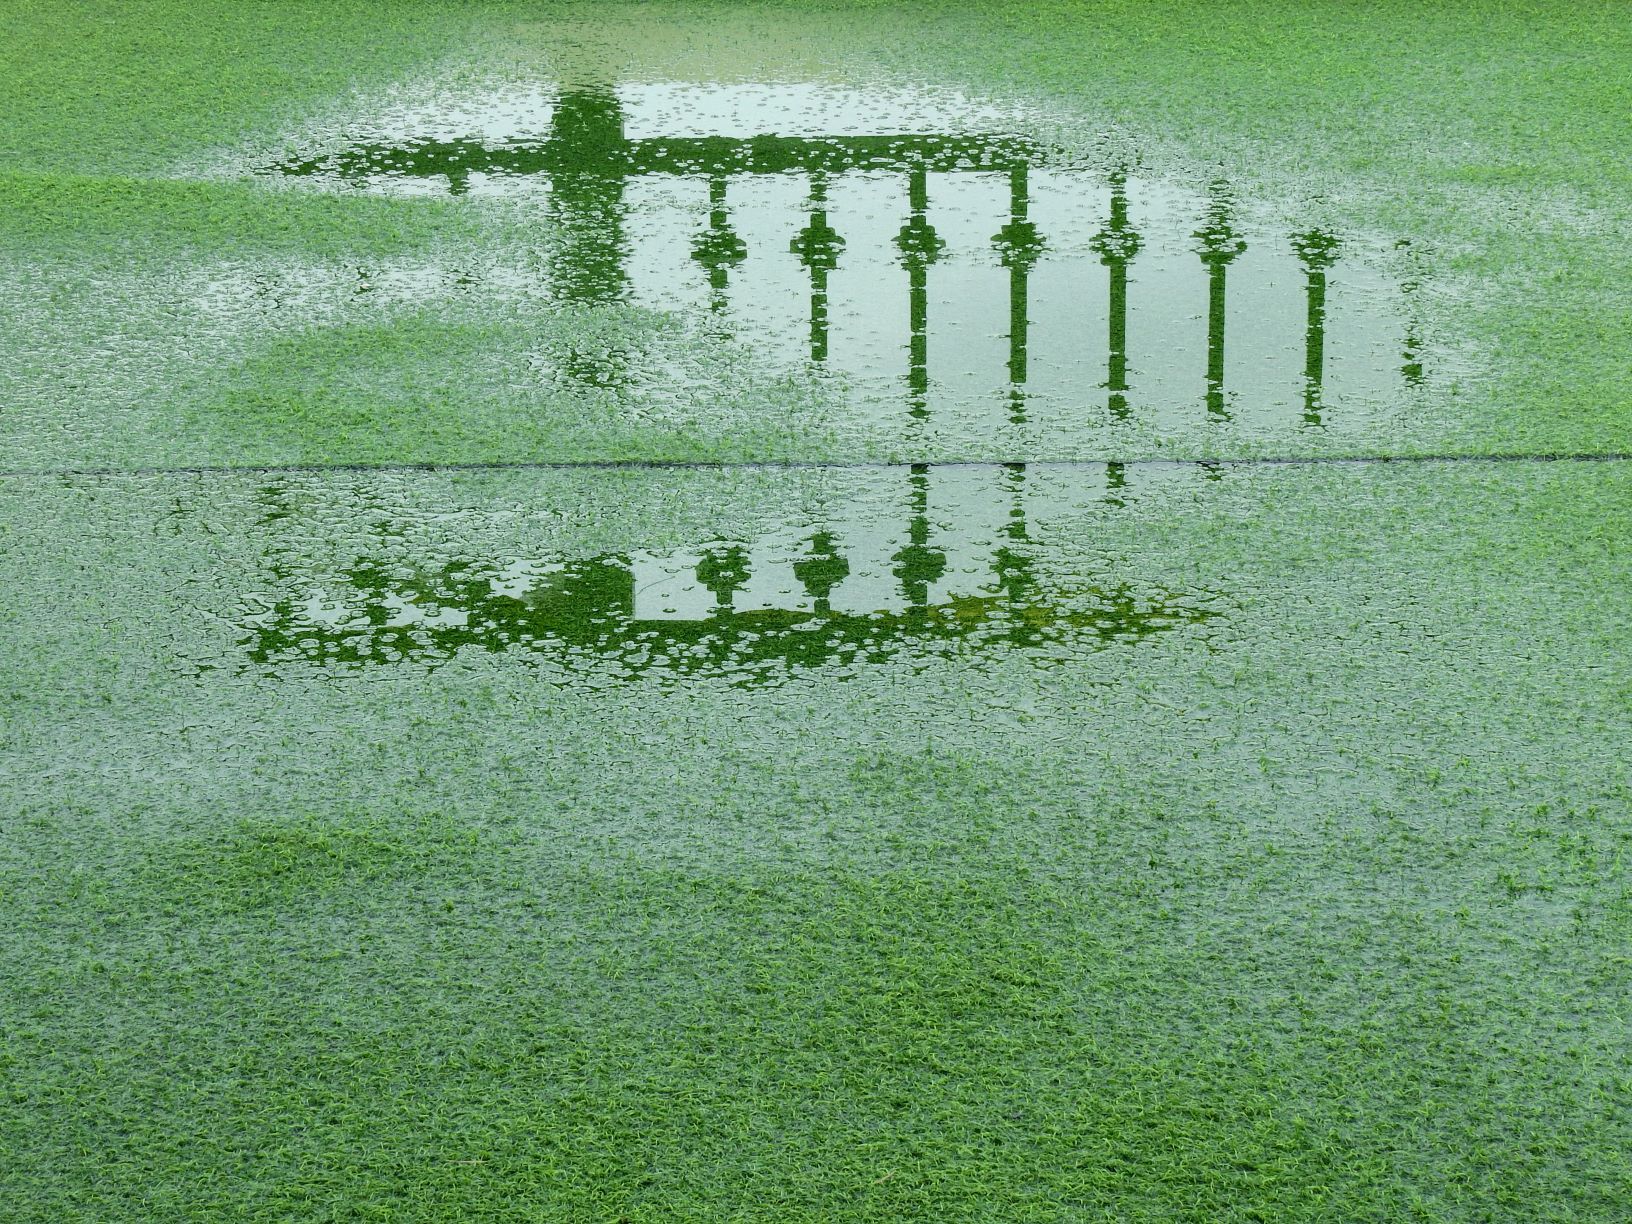 Can Artificial Turf Withstand Bad Weather?